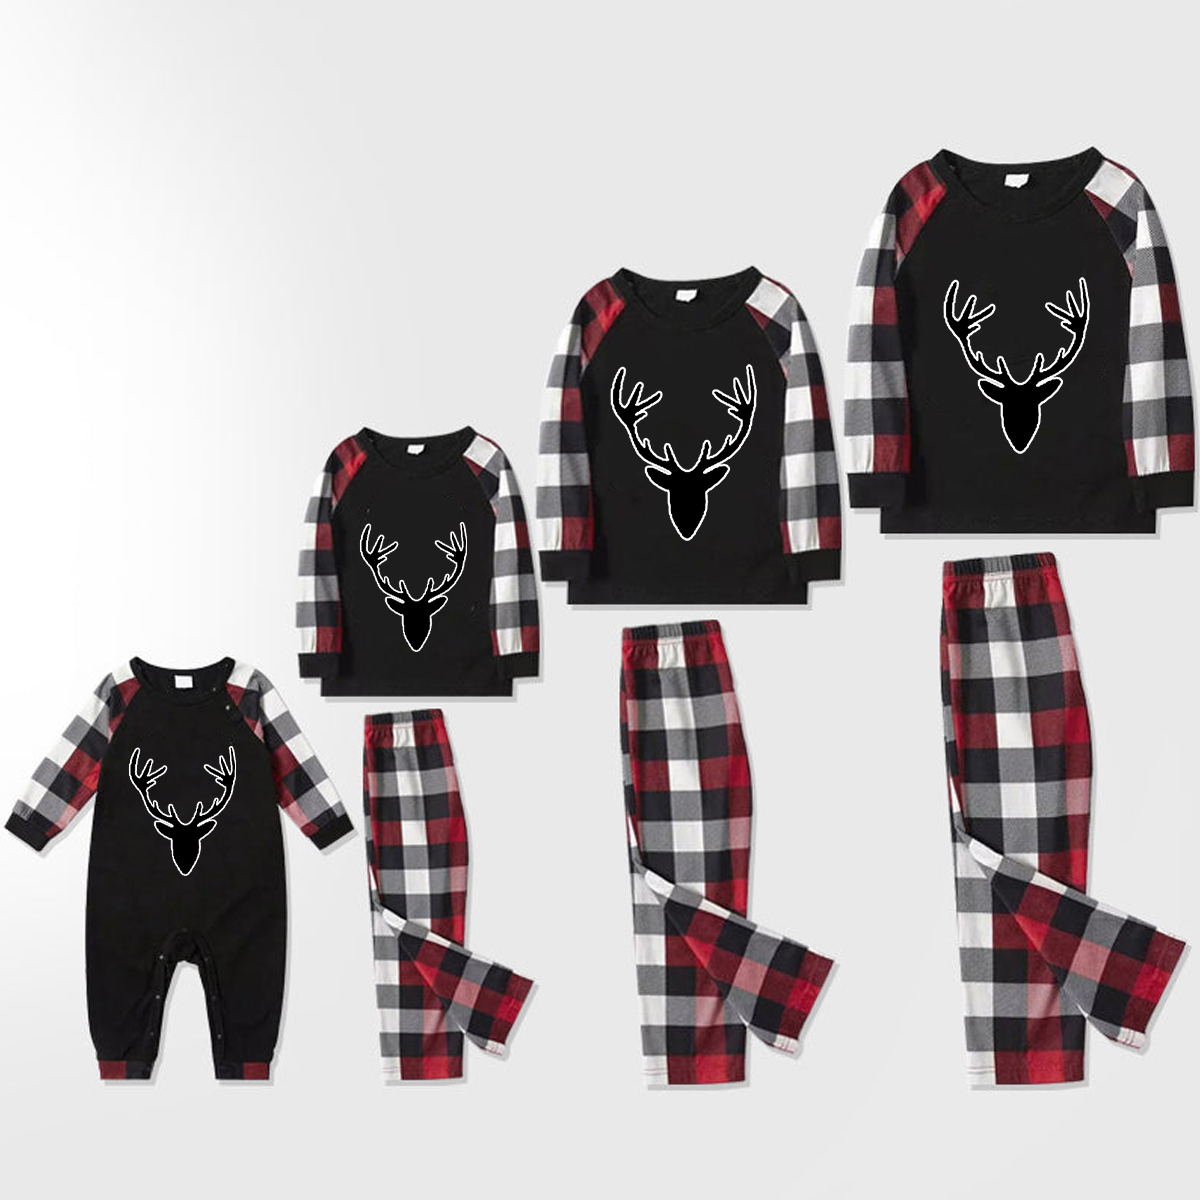 Christmas Cute Cartoon Deer Prints and simple Prints Contrast Tops and Red & Black & White Plaid Pants Family Matching Pajamas Set With Dog Bandana